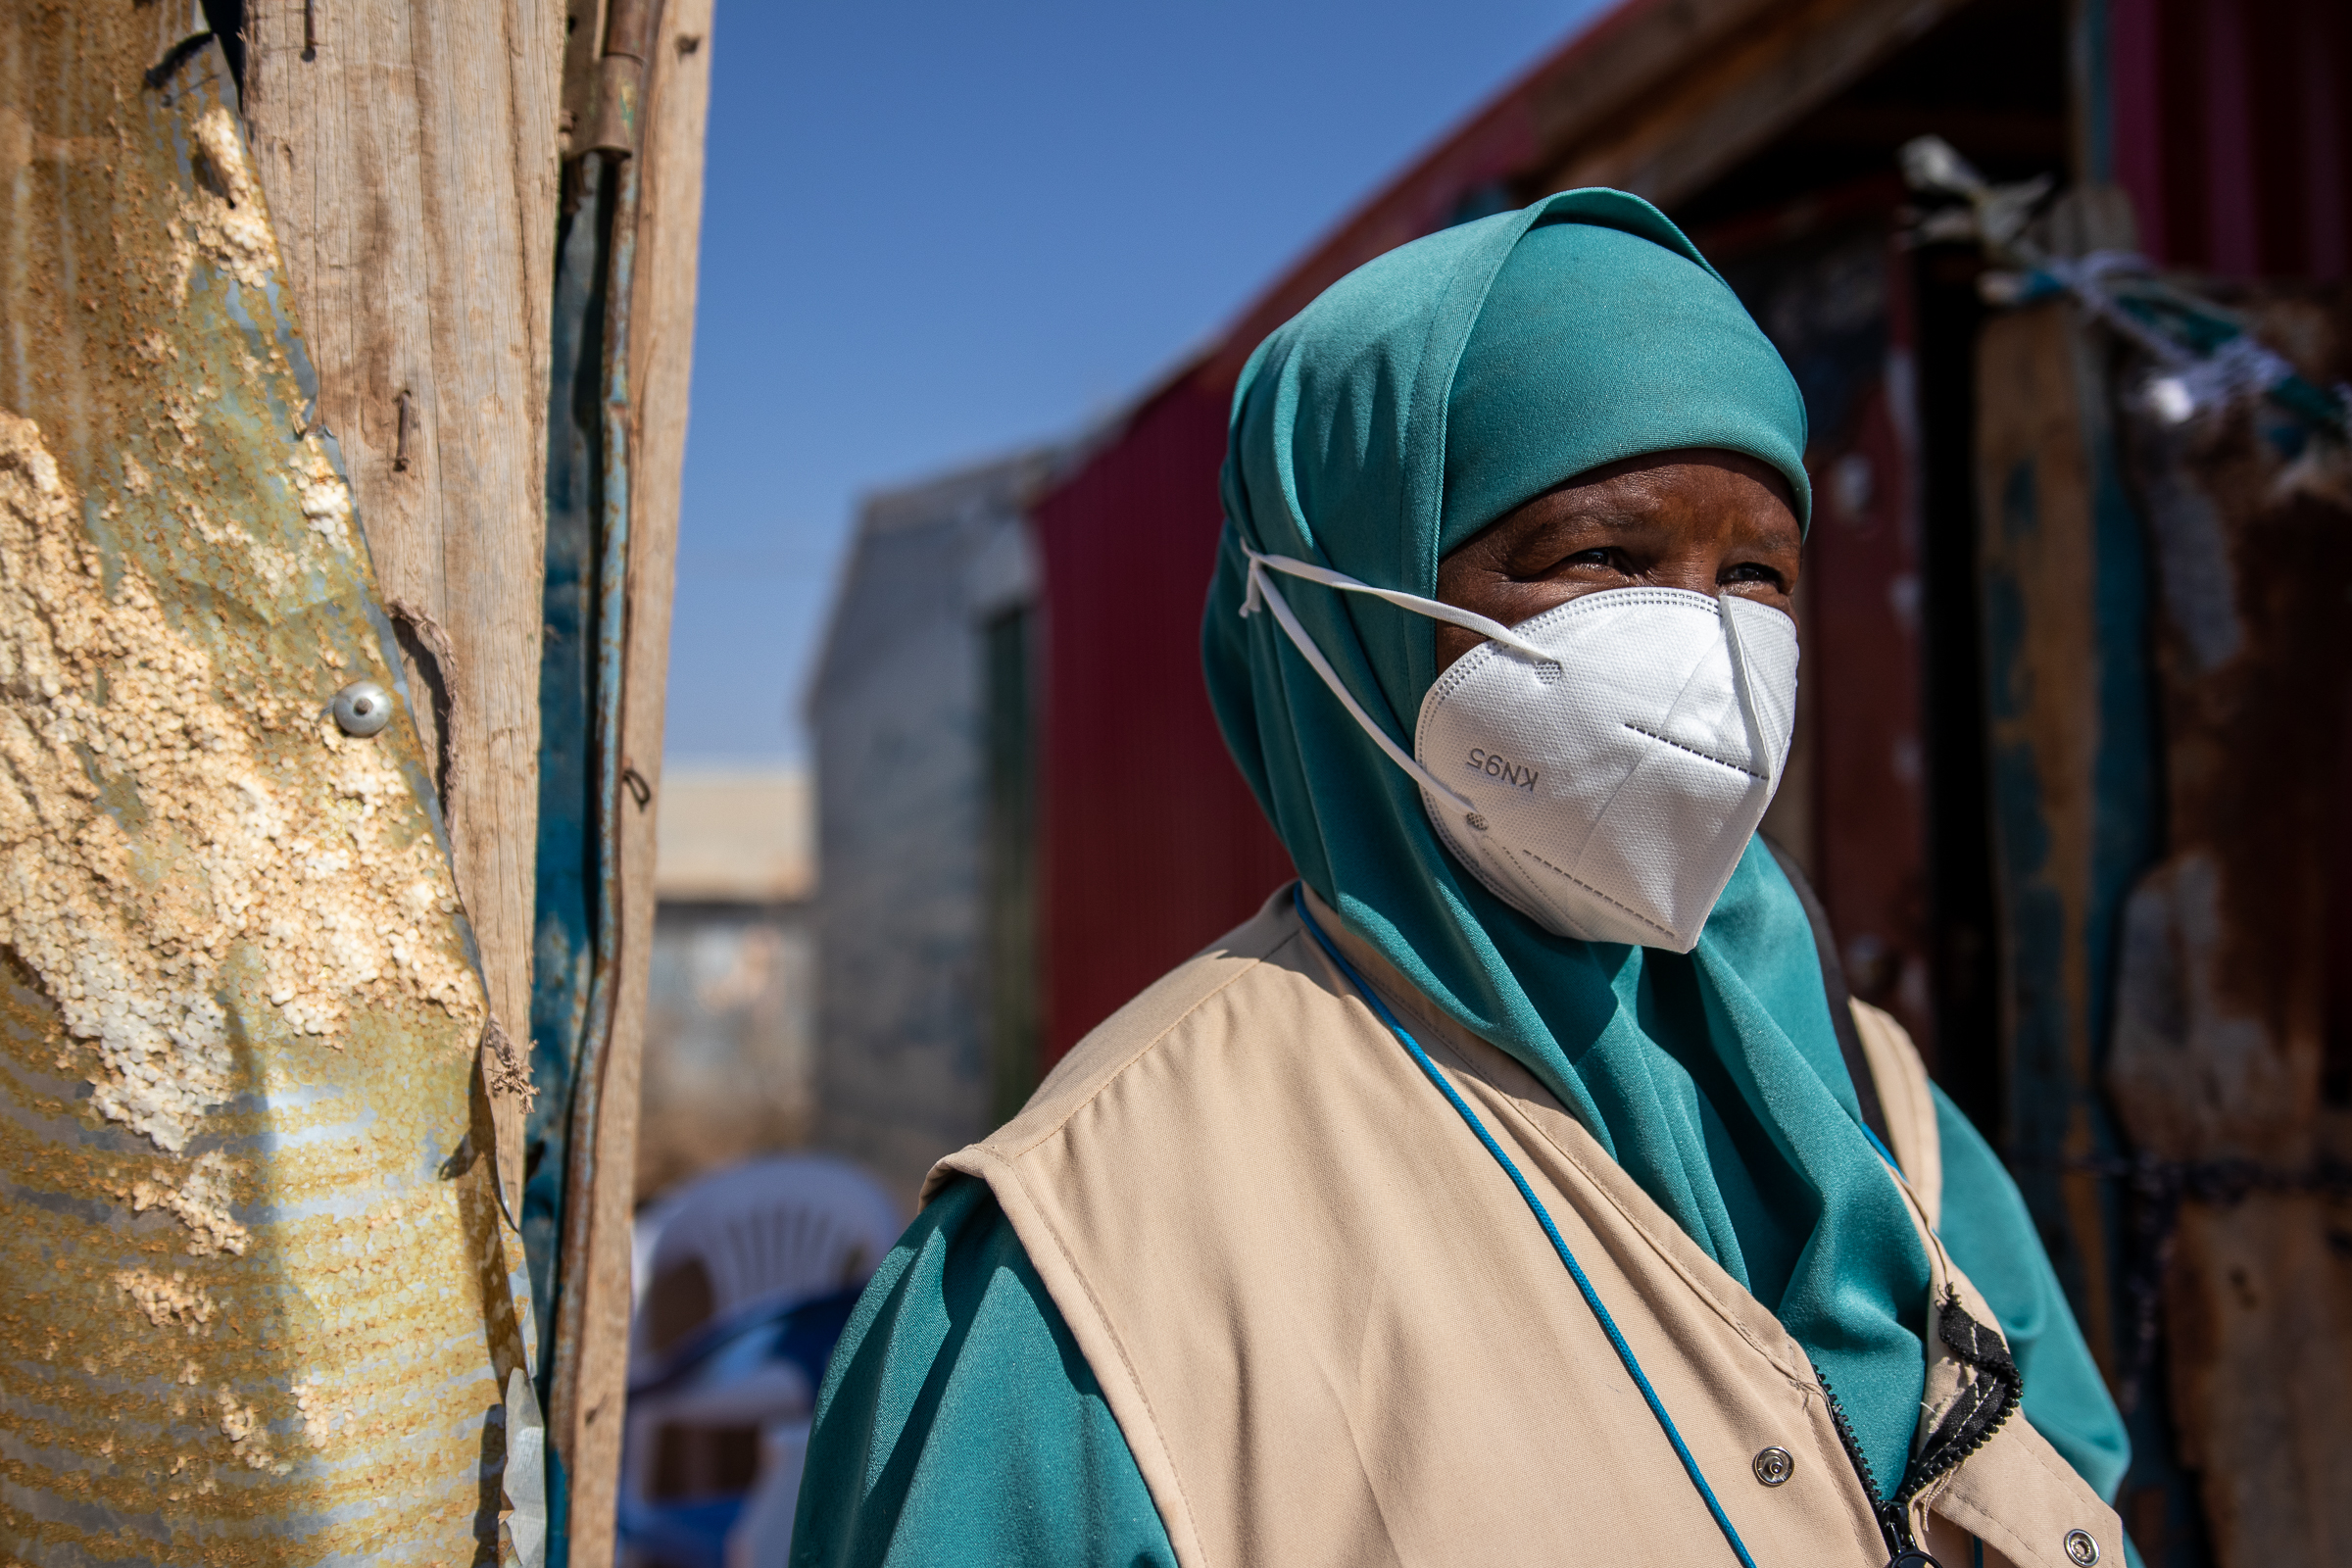 A woman standing outside by a wall wears a face mask and looks at the camera. She is wearing a turquoise coloured uniform and head covering, and a beige vest.